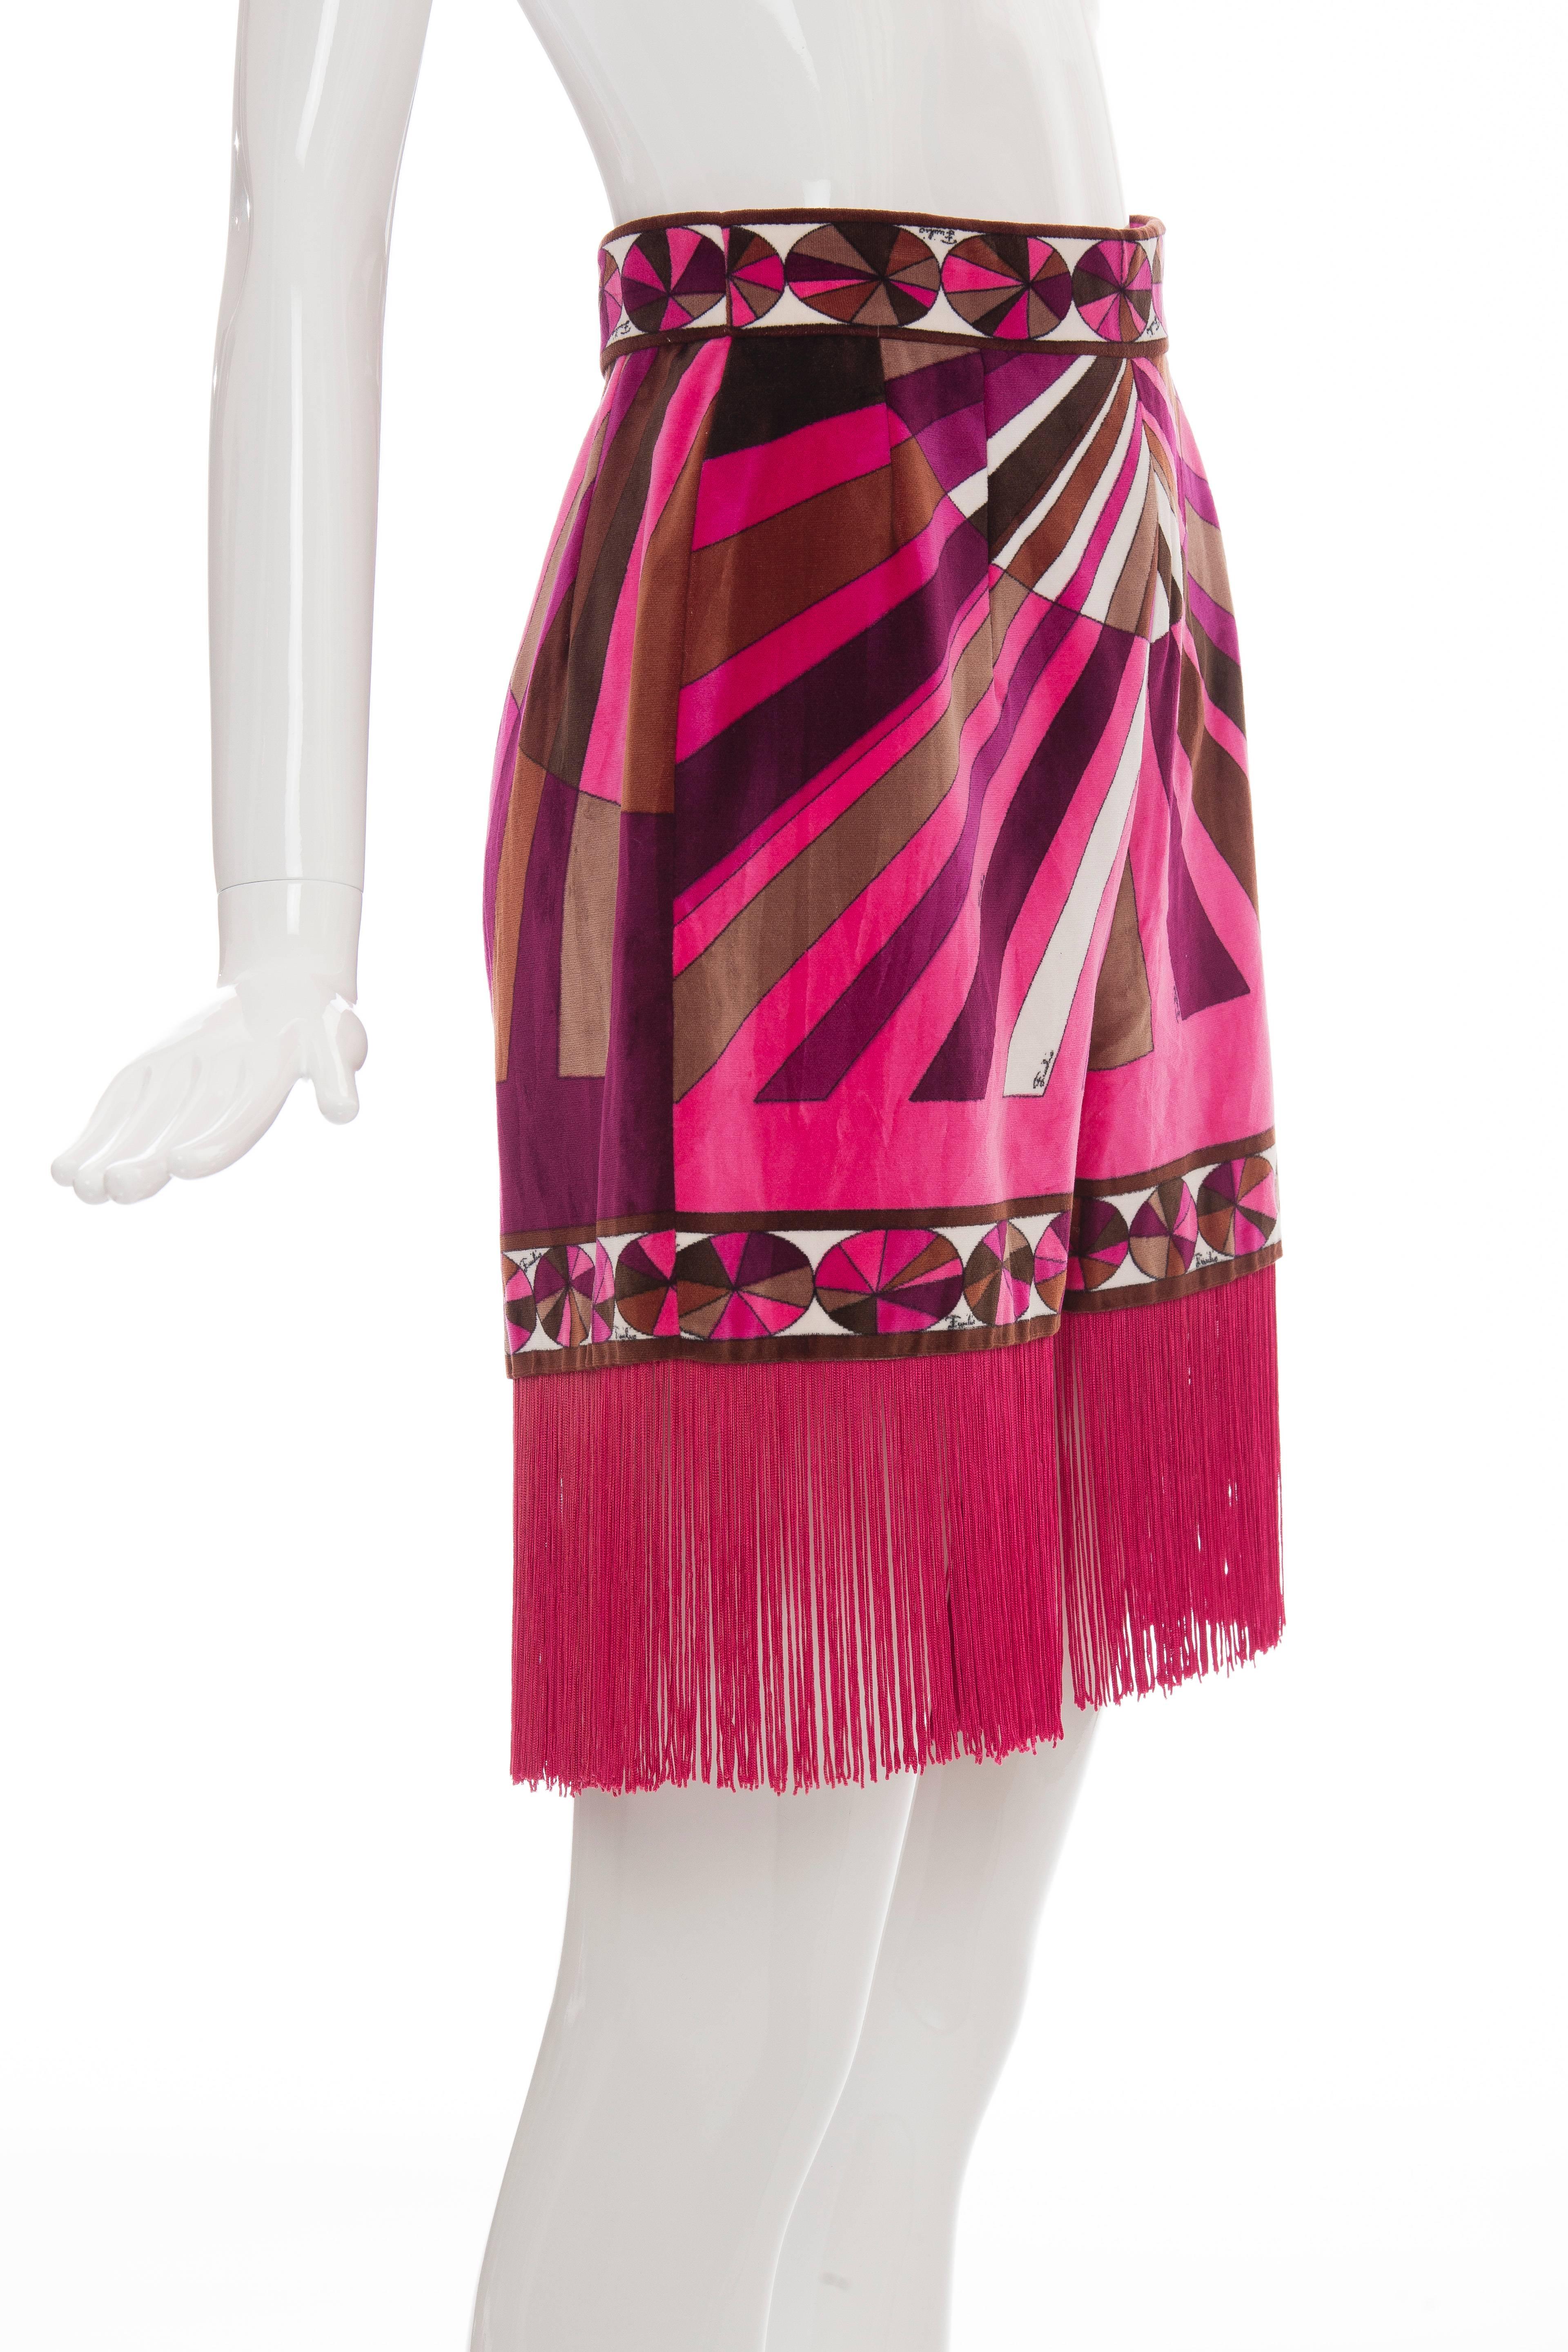 Emilio Pucci Pink Printed Velvet High Waisted Hot Pants Fringe Trim, Circa 1970s In Excellent Condition In Cincinnati, OH